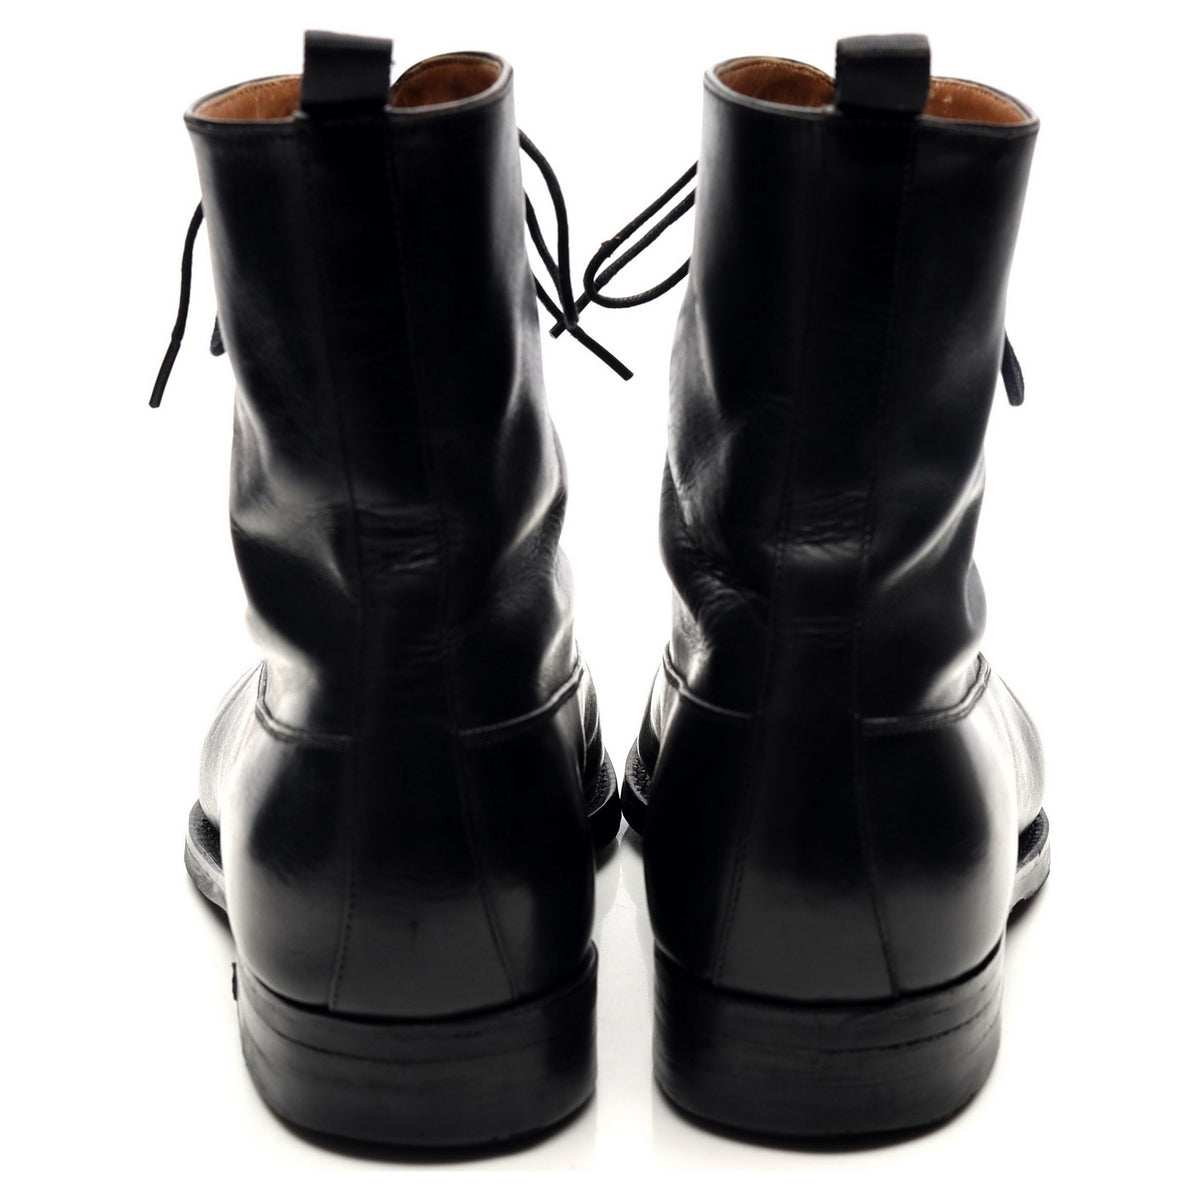 &#39;80092&#39; Black Leather Balmoral Boots UK 7 EE